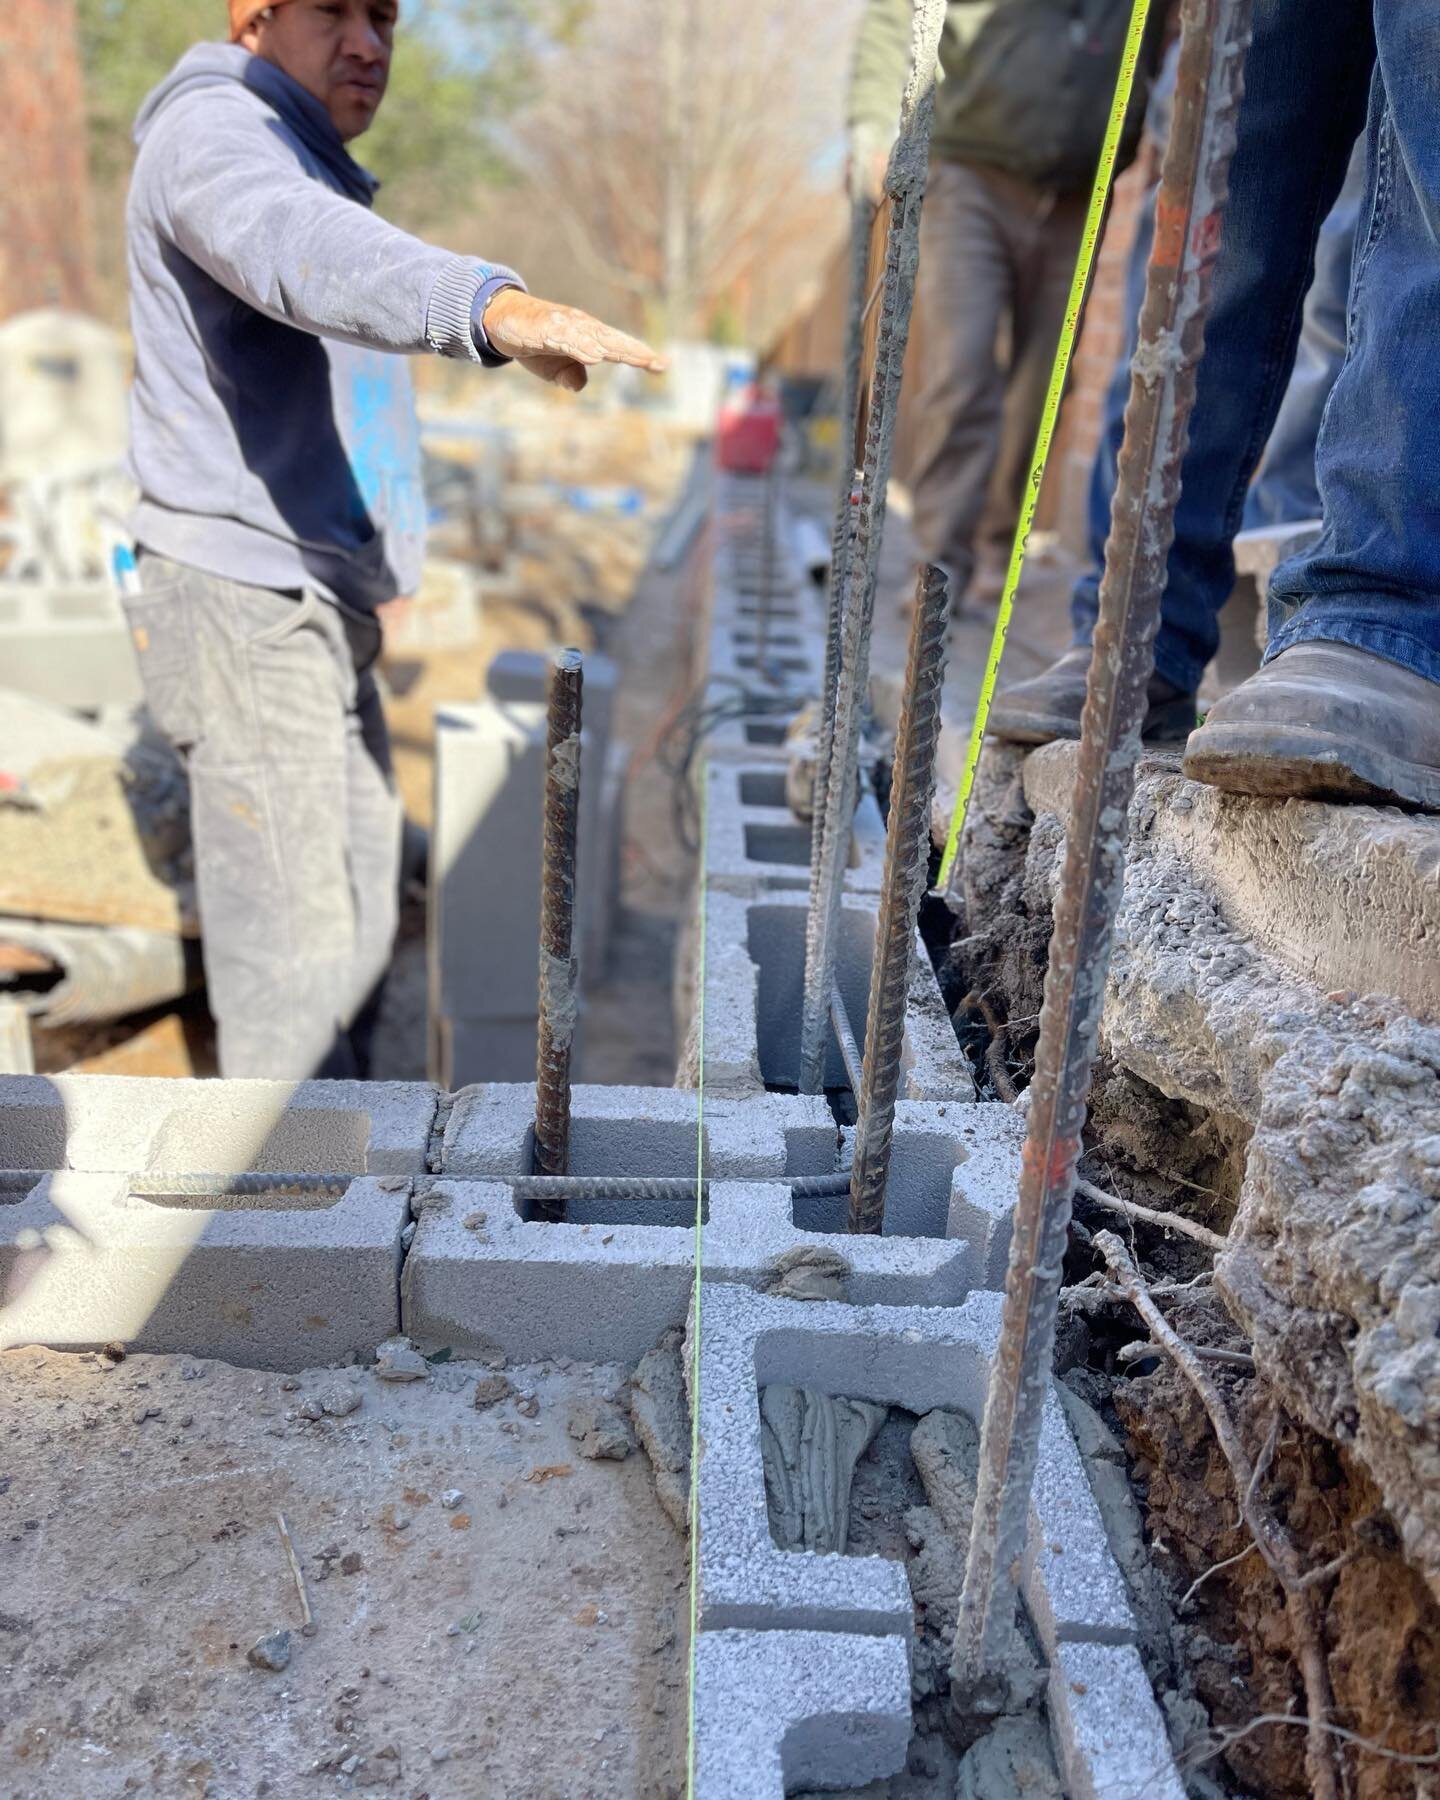 Does anyone else feel like 75% of the project is preparation and communication as a team in order to achieve the greatest success? The work is the easy part with the experienced tradesman. #masonry #cinderblock #rebar